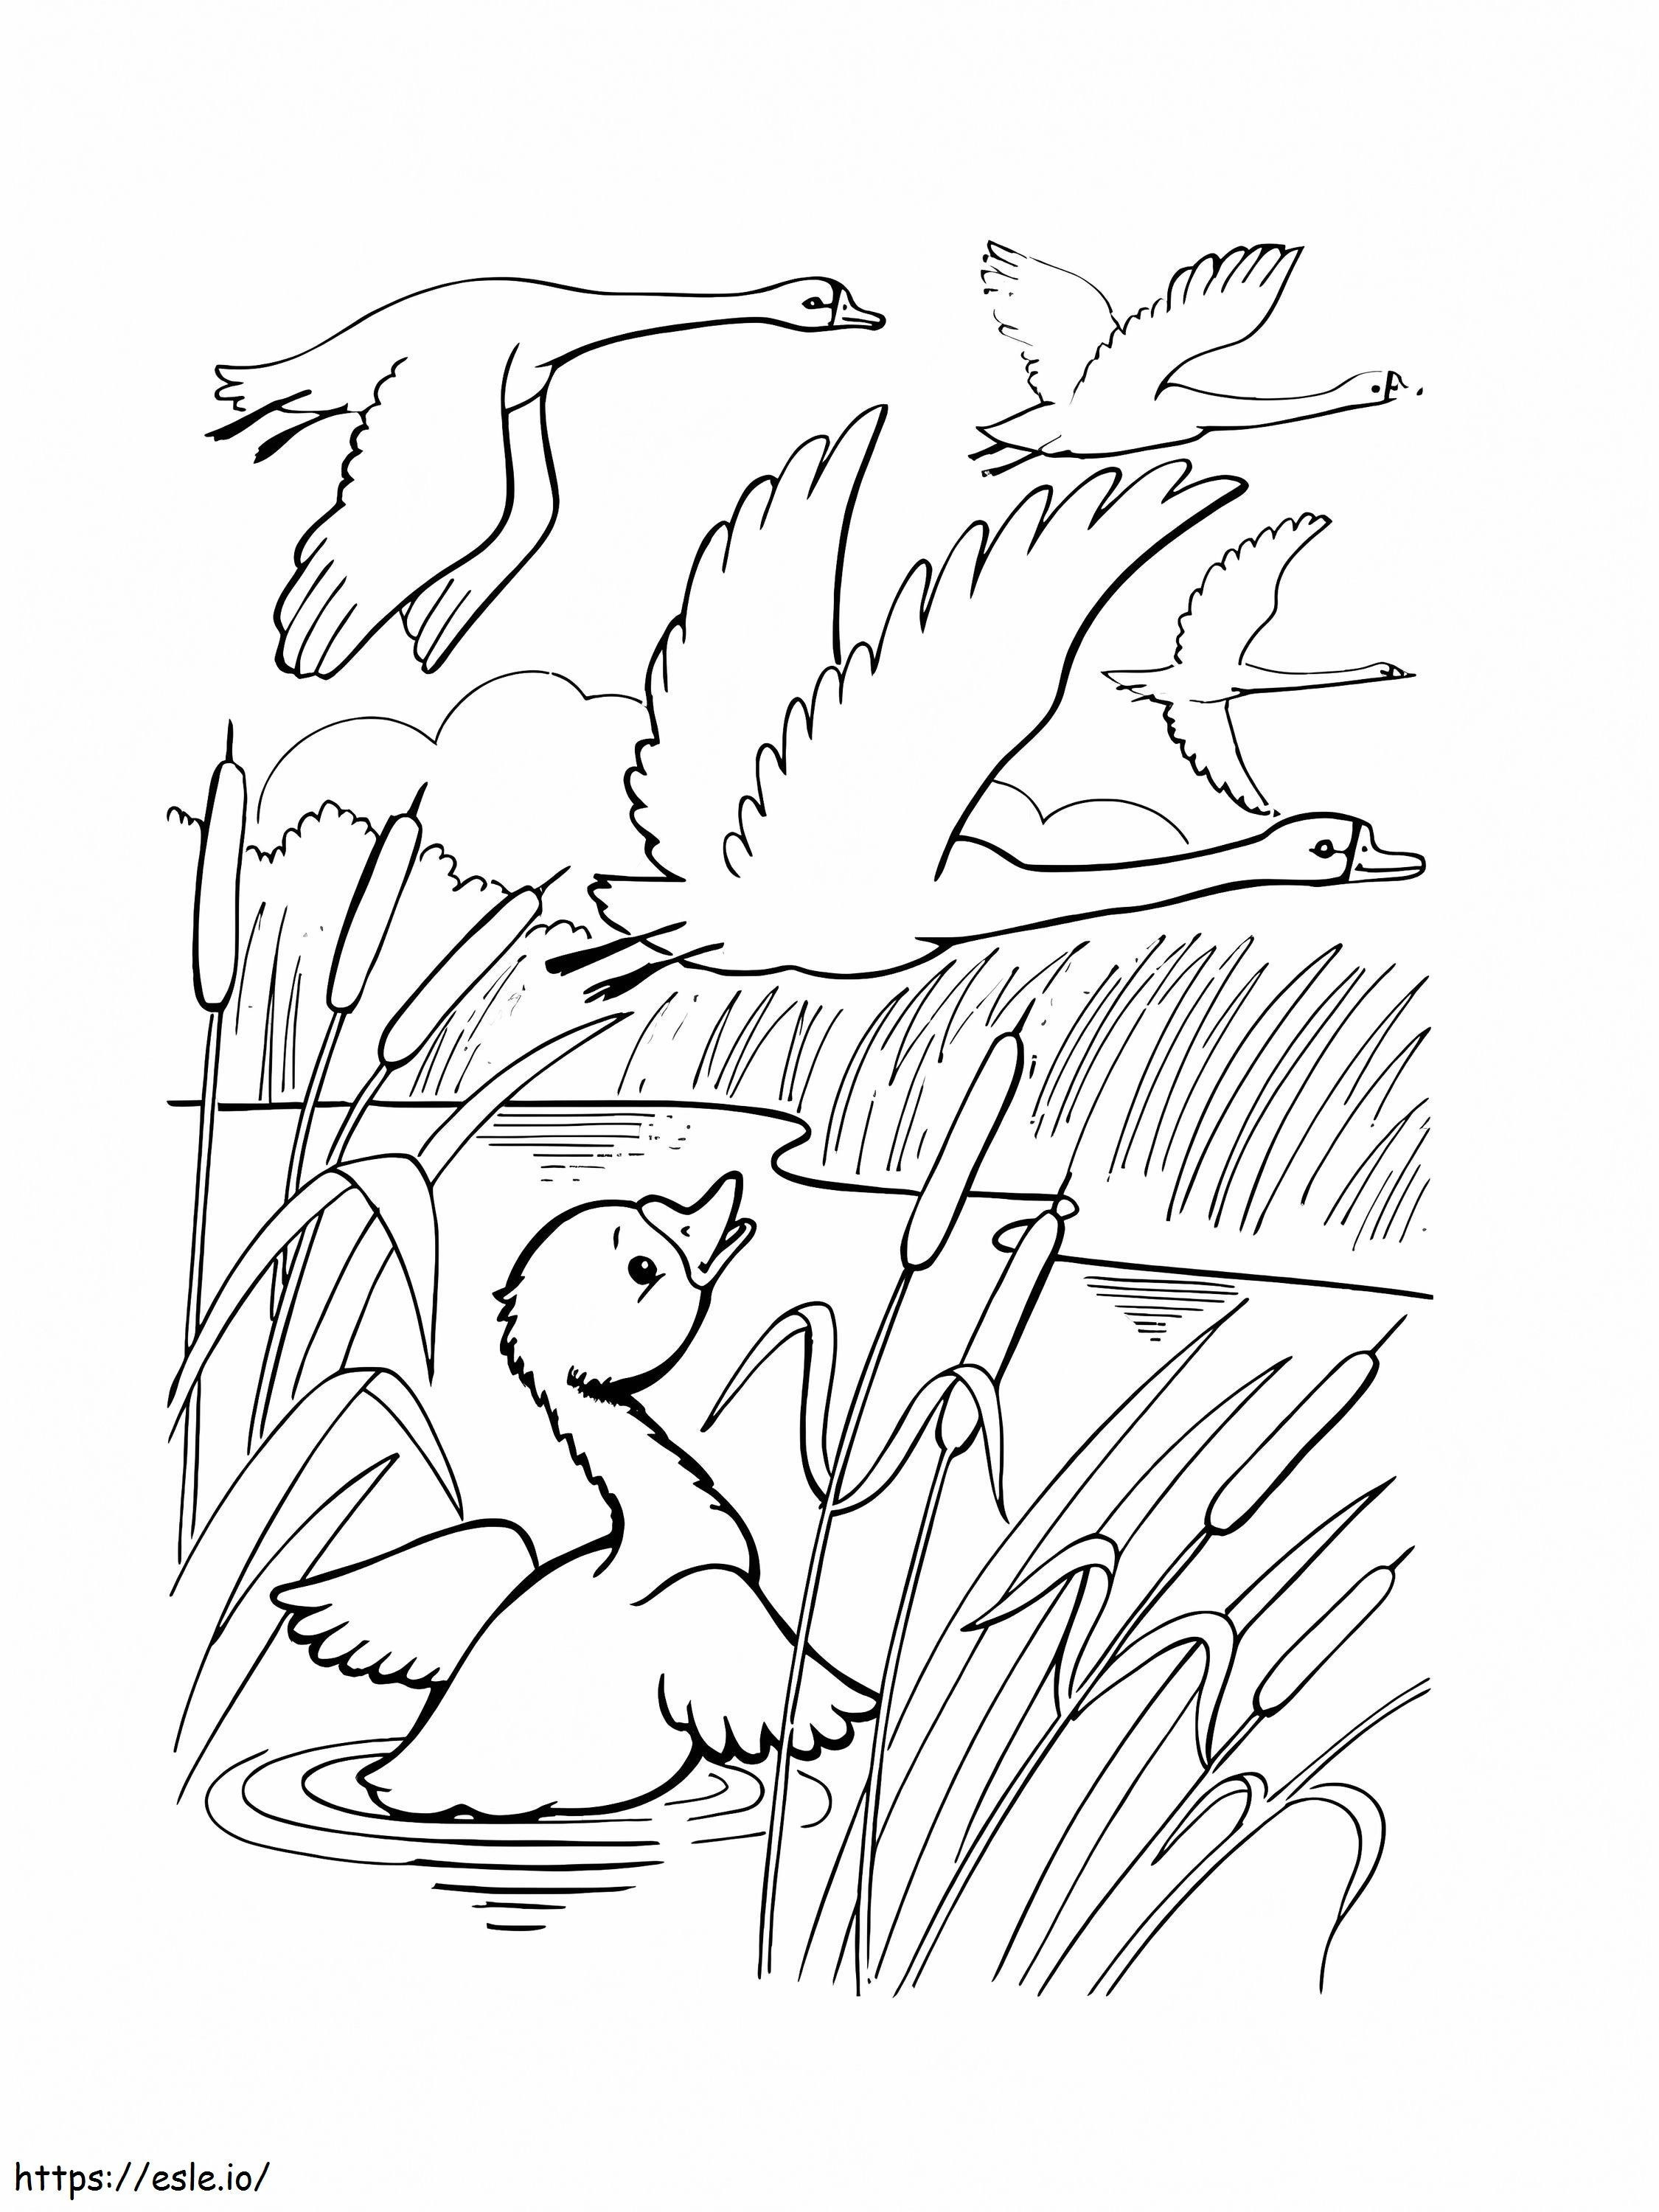 Swans Flying coloring page